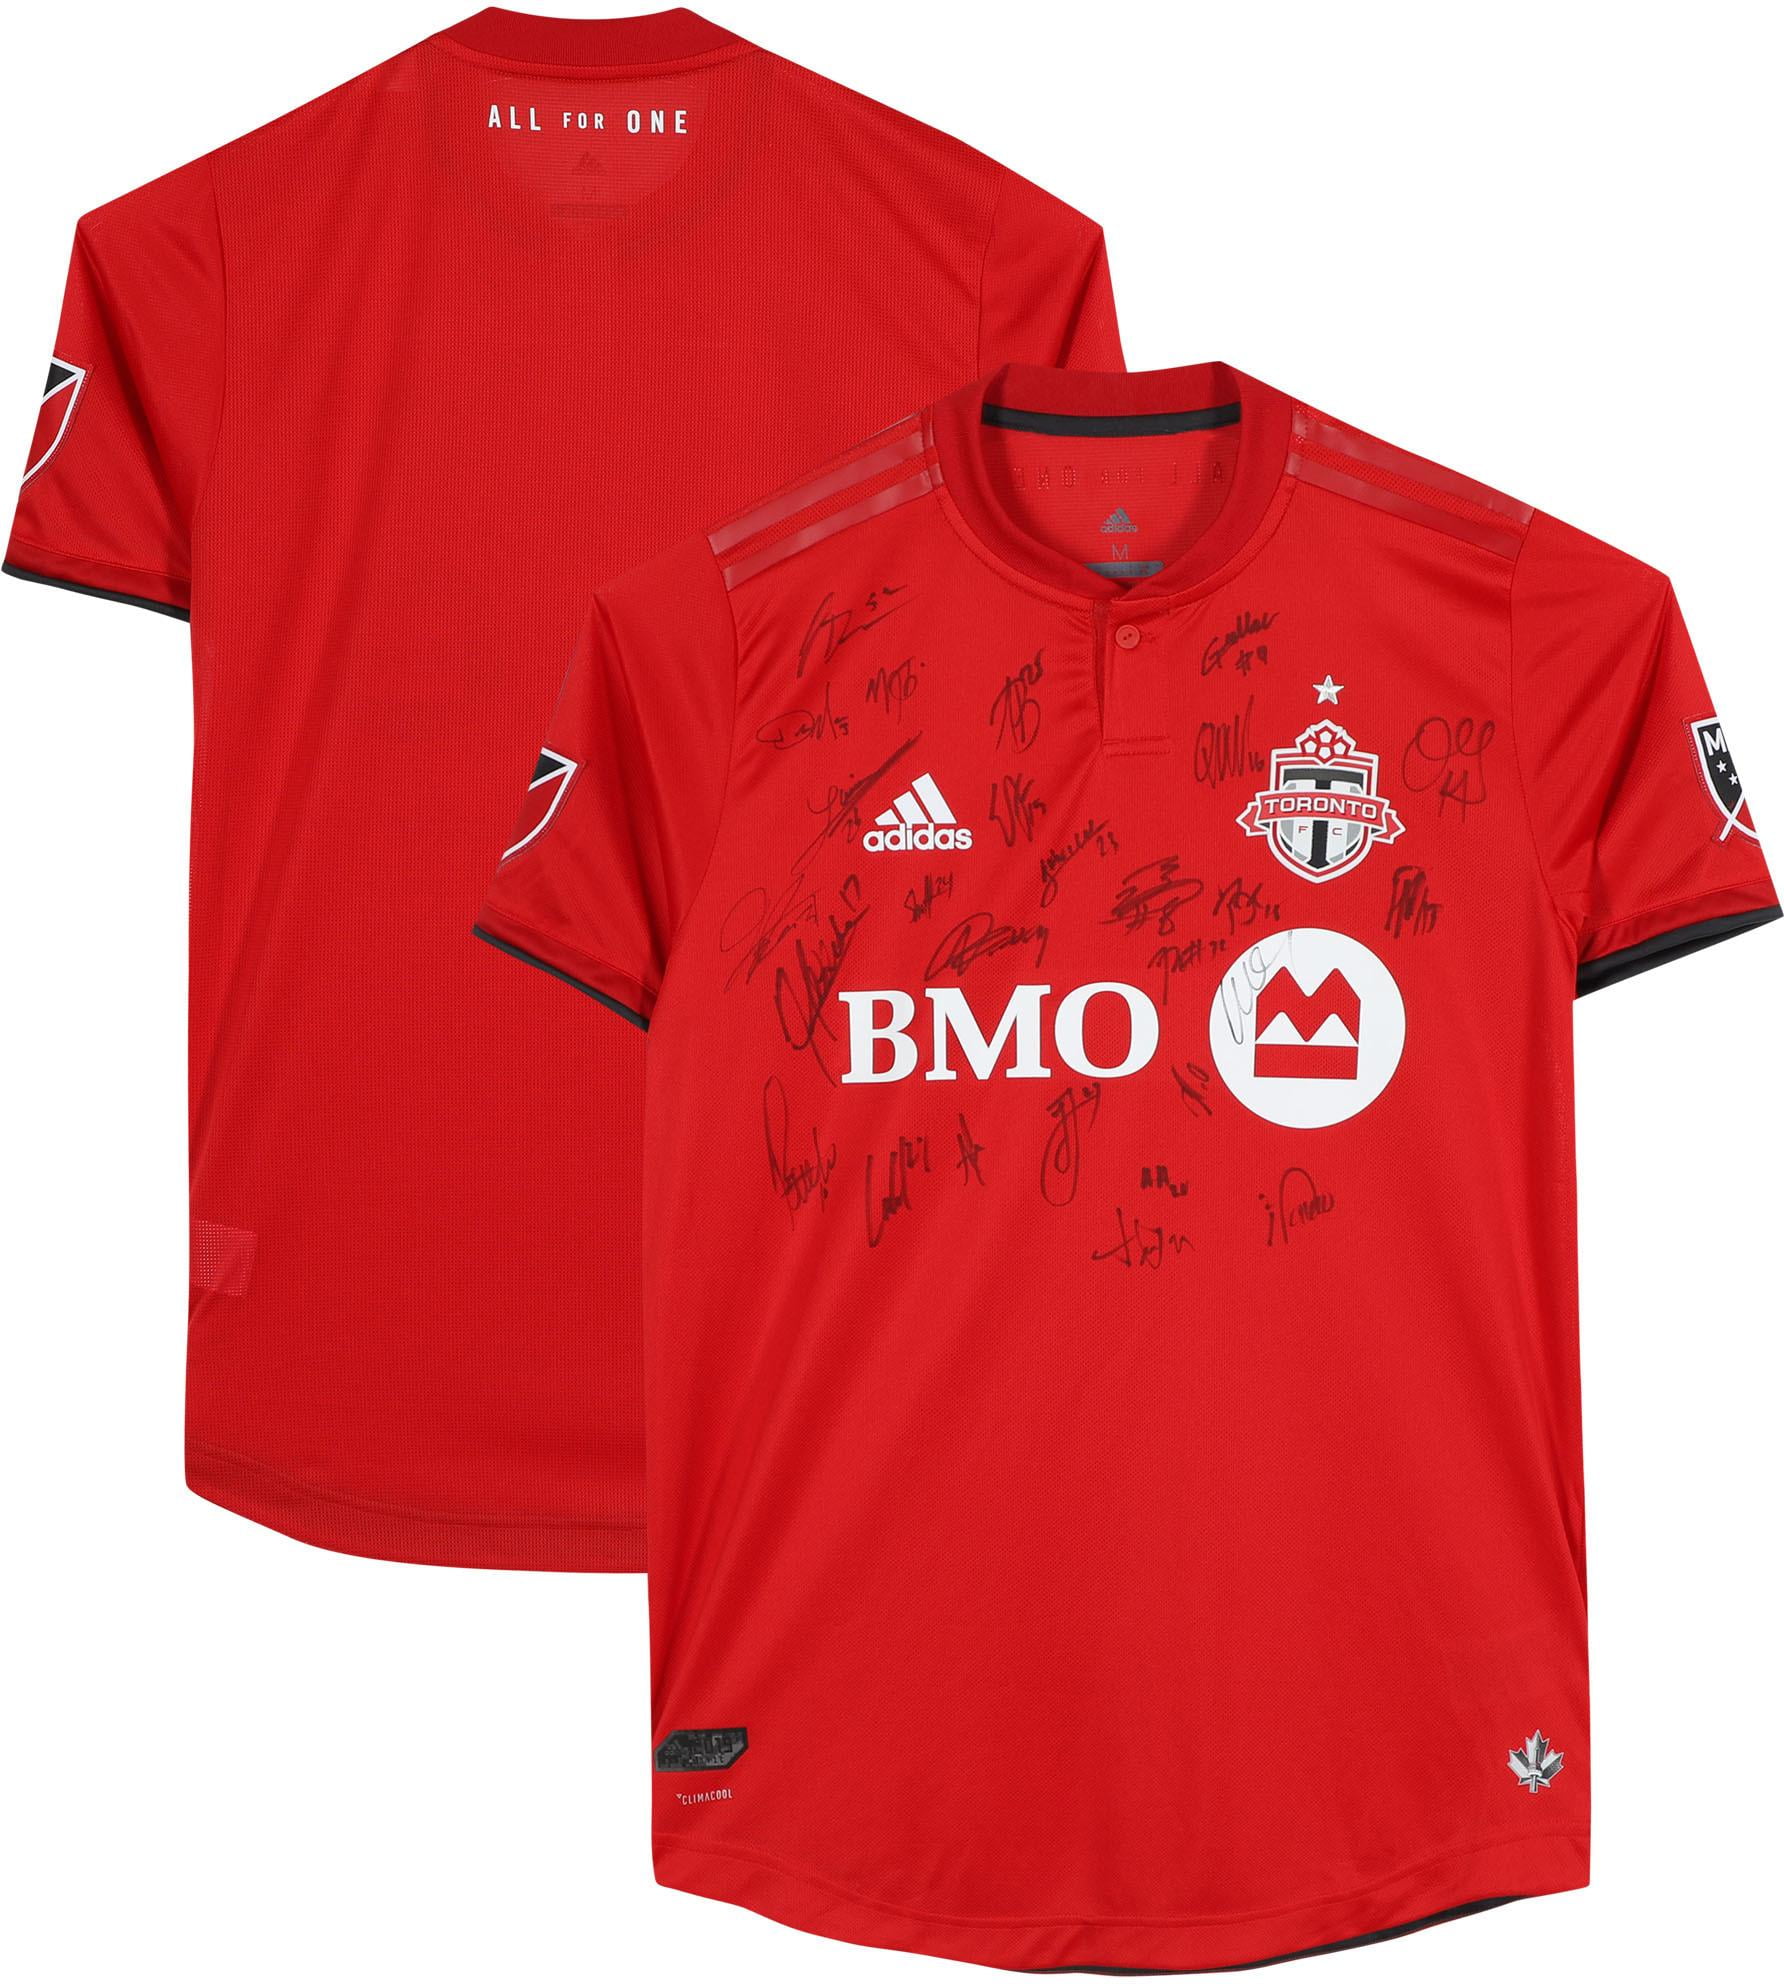 Toronto FC Autographed TeamIssued Jersey from the 2019 MLS Season with